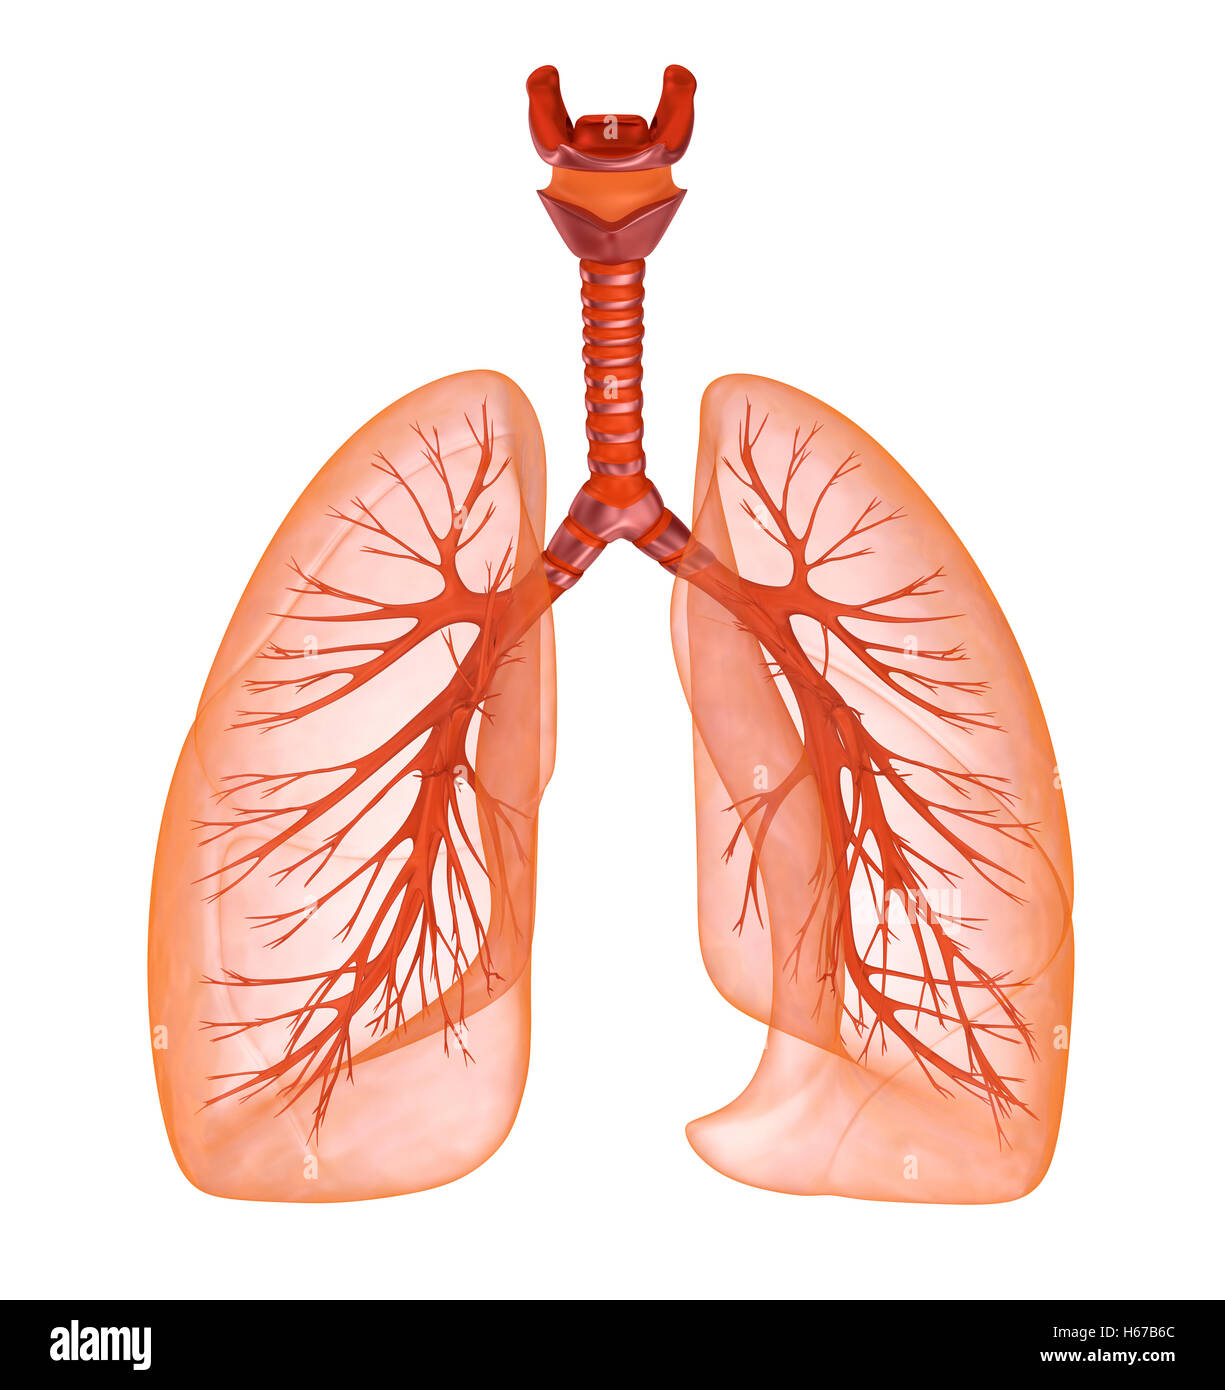 Human lungs and trachea. Medically accurate 3D illustration Stock Photo